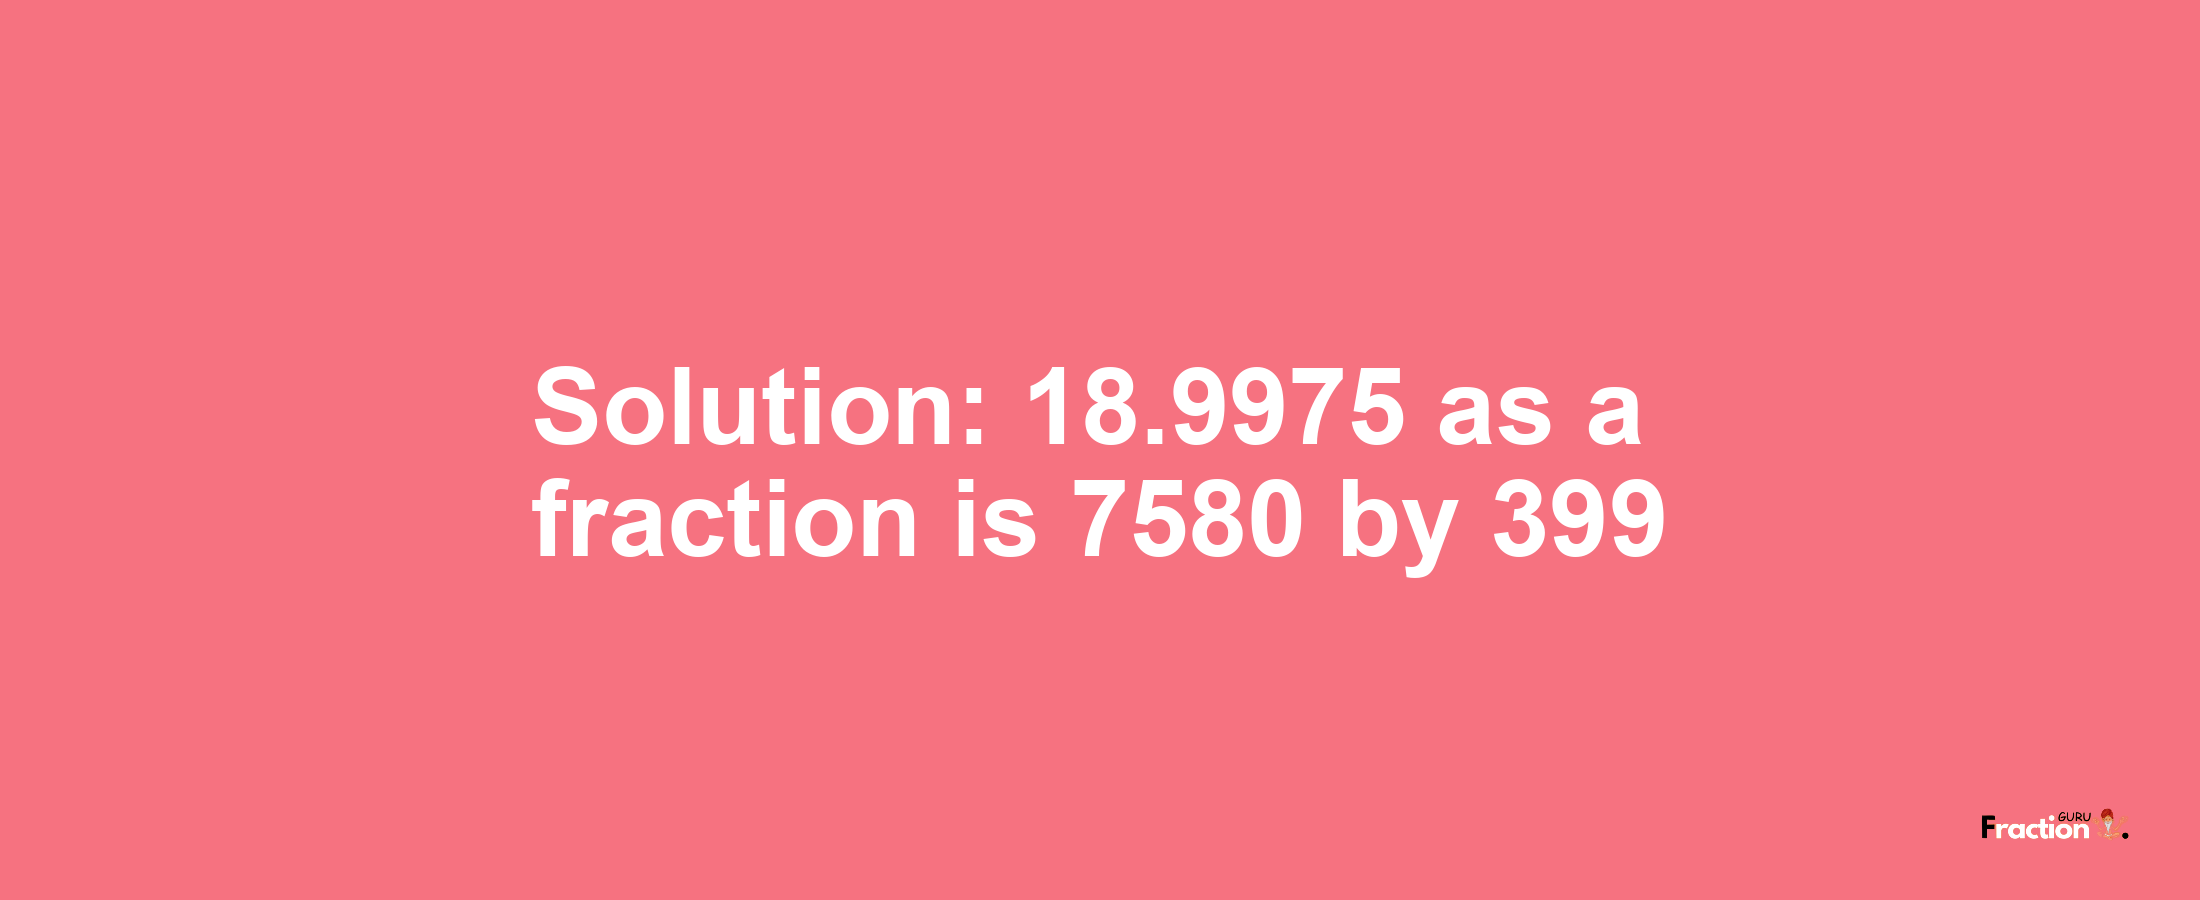 Solution:18.9975 as a fraction is 7580/399